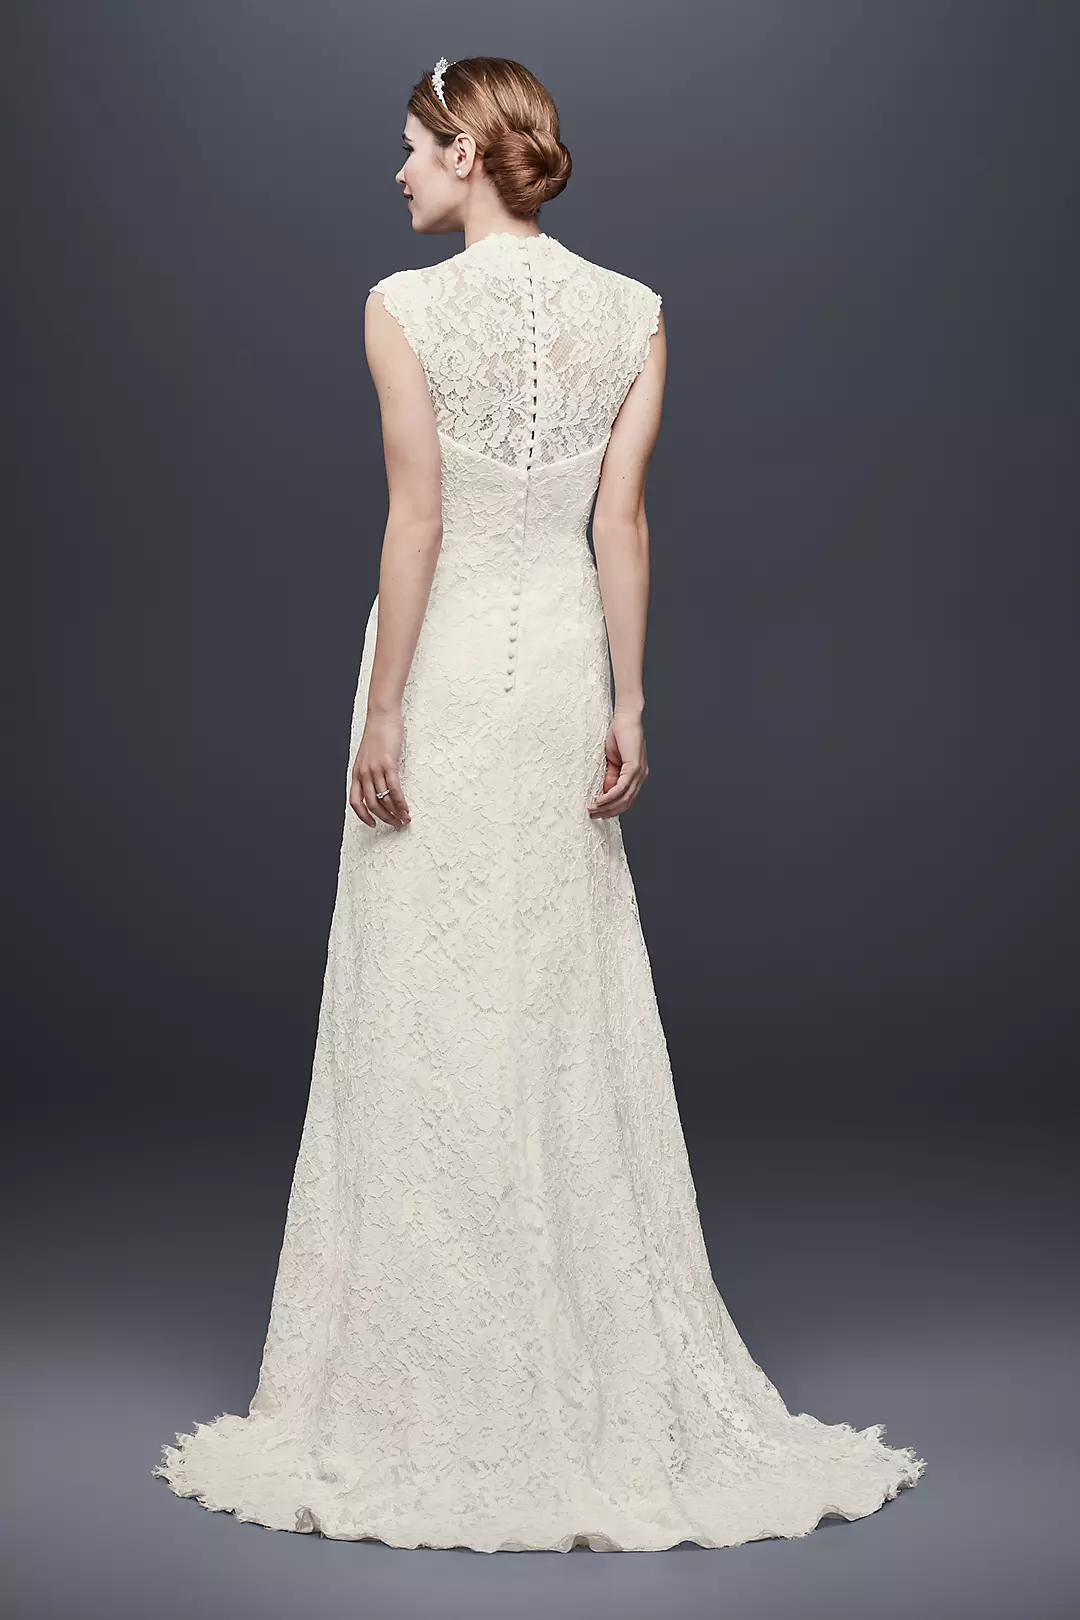 As-Is Allover Lace Cap Sleeve Sheath Wedding Dress Image 2